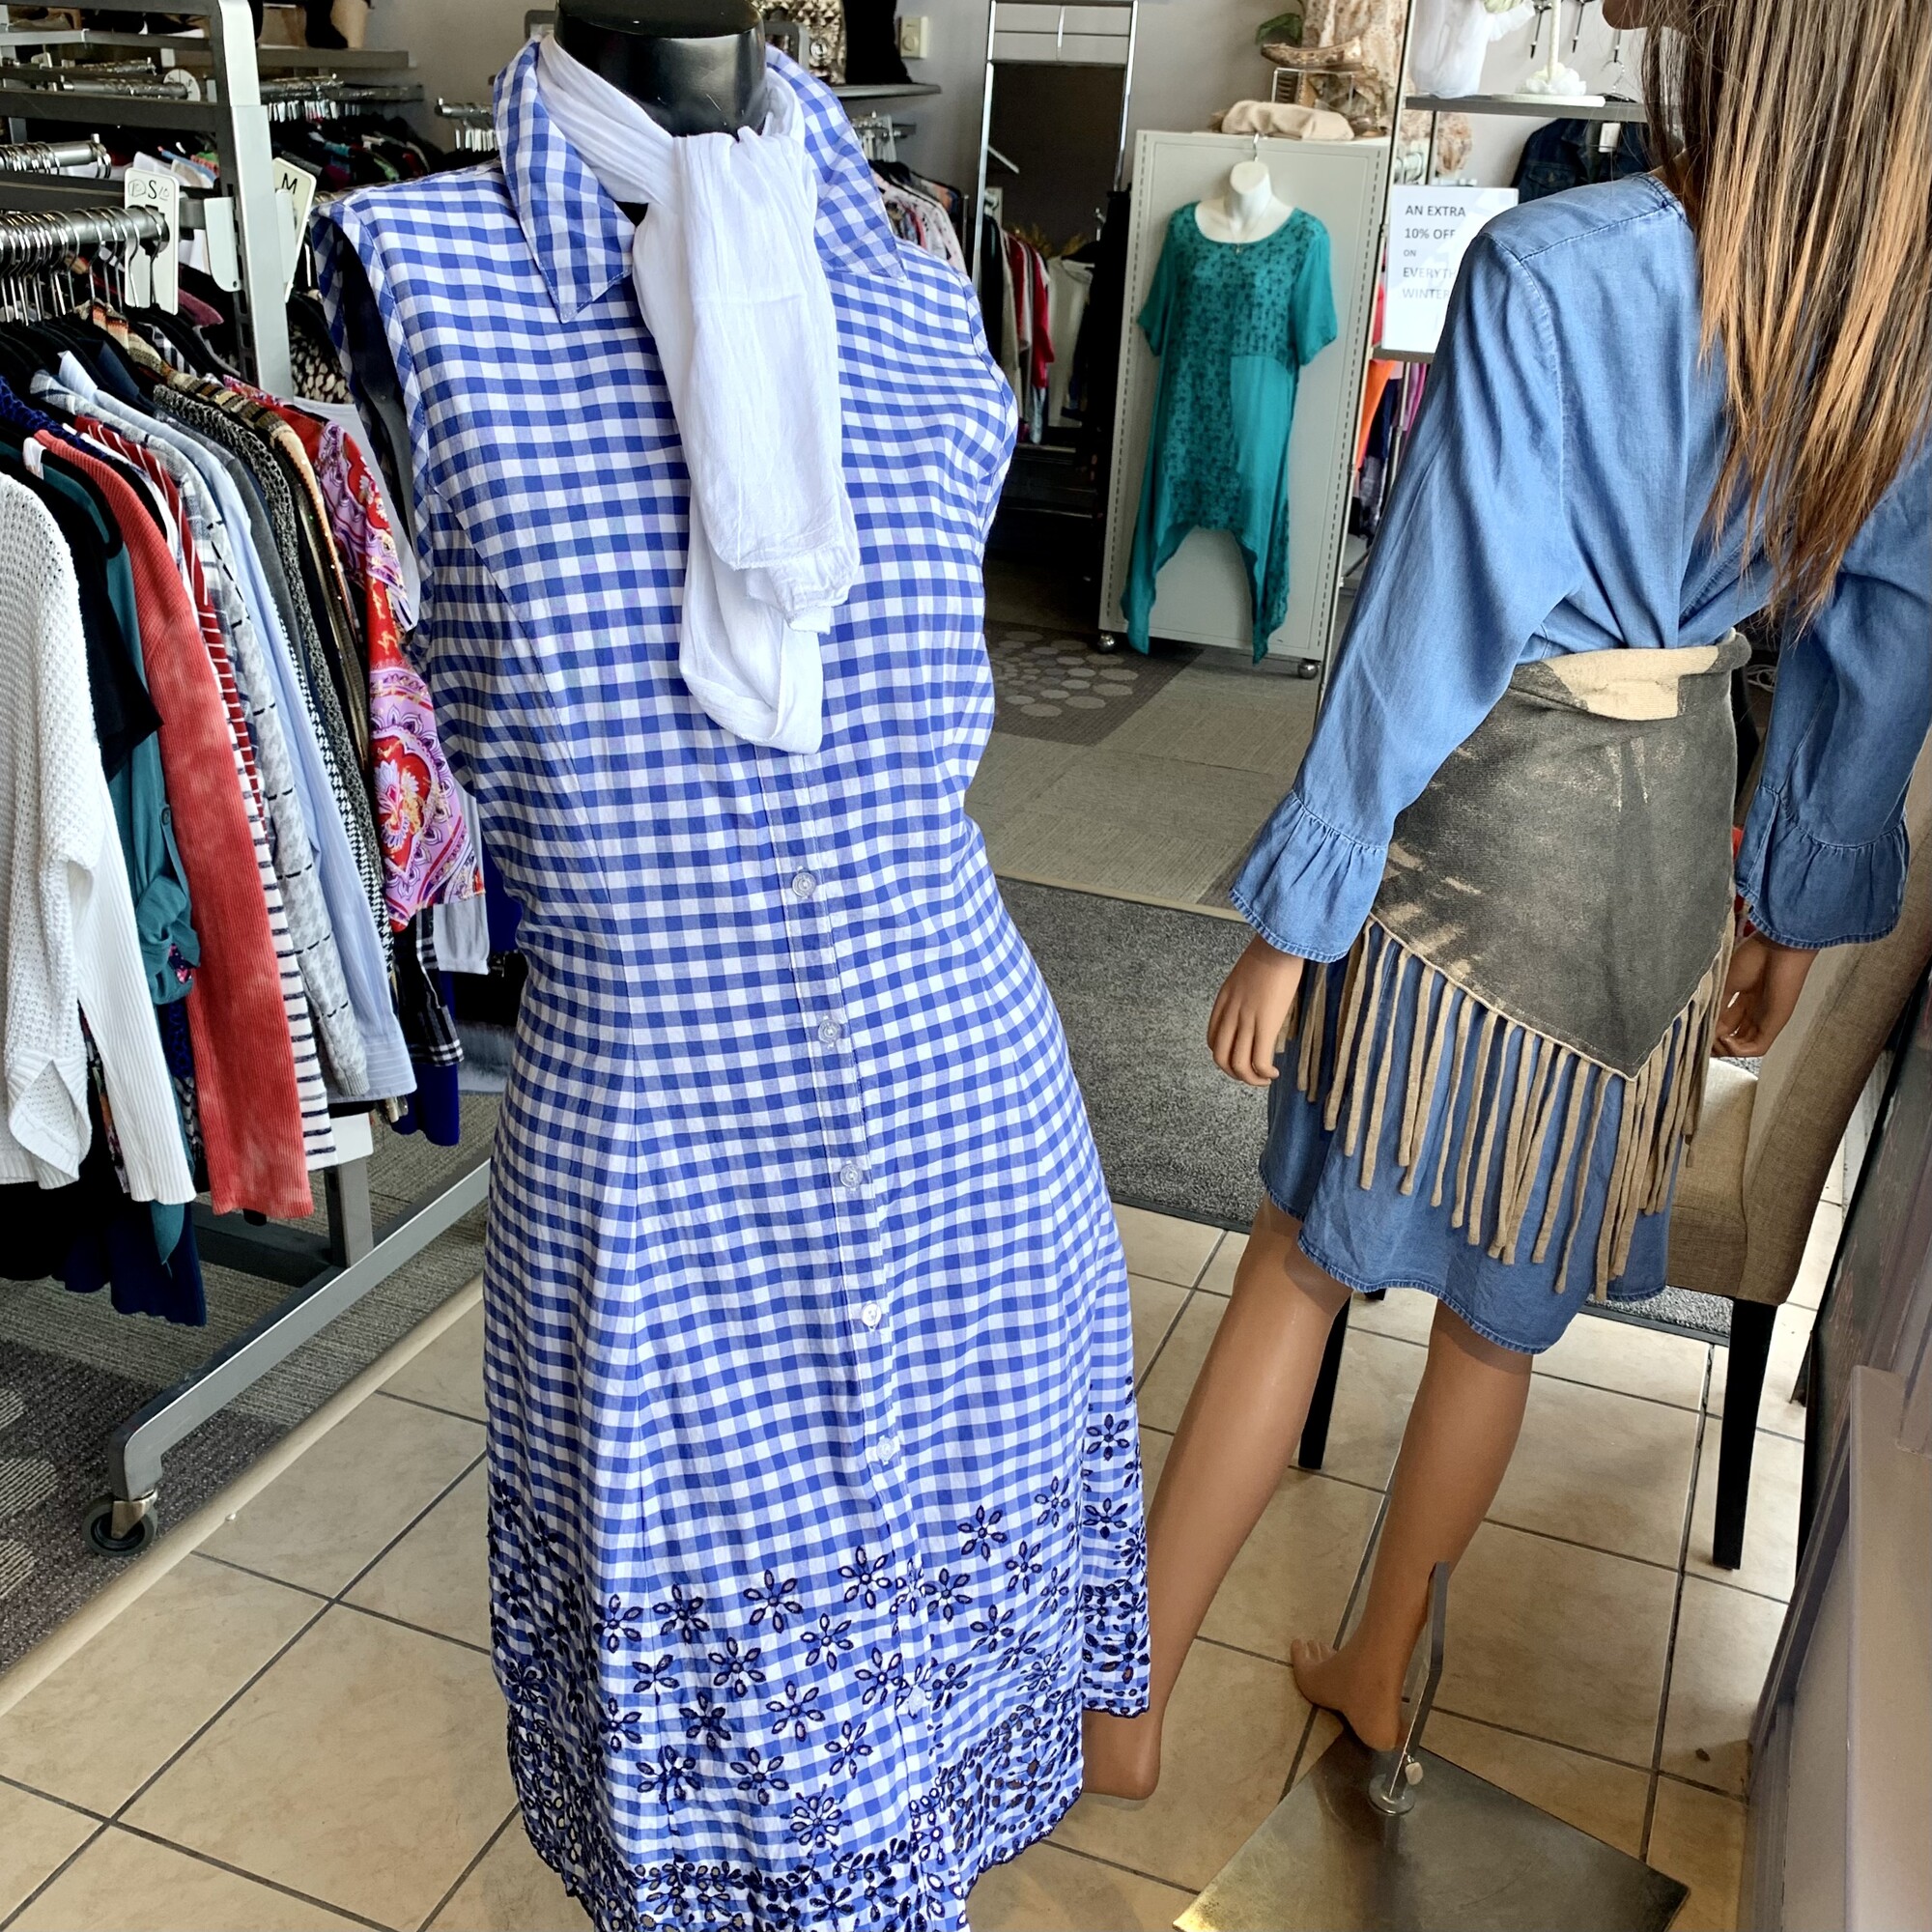 Isaac Mizrahi Live Dress,
Colour: Blue and white gingham,
Size: 10,
Lined button down dress,